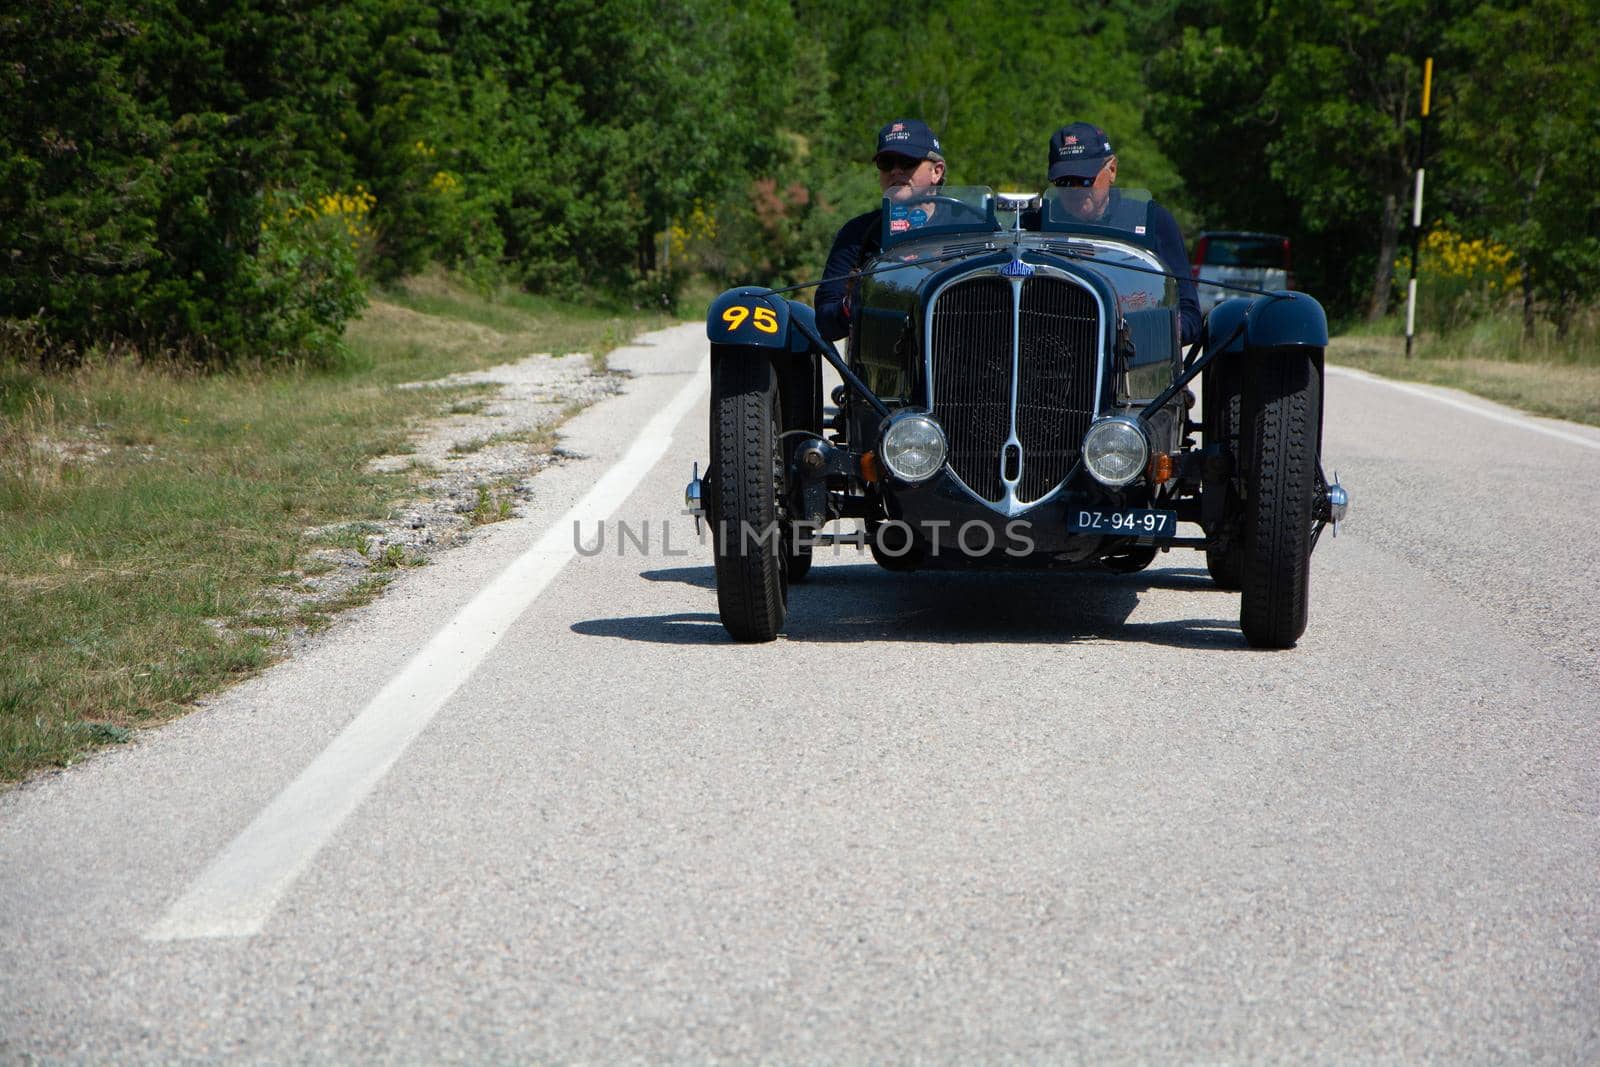 DELAHAYE 135 CS 1936 on an old racing car in rally Mille Miglia 2022 the famous italian historical race (1927-1957 by massimocampanari